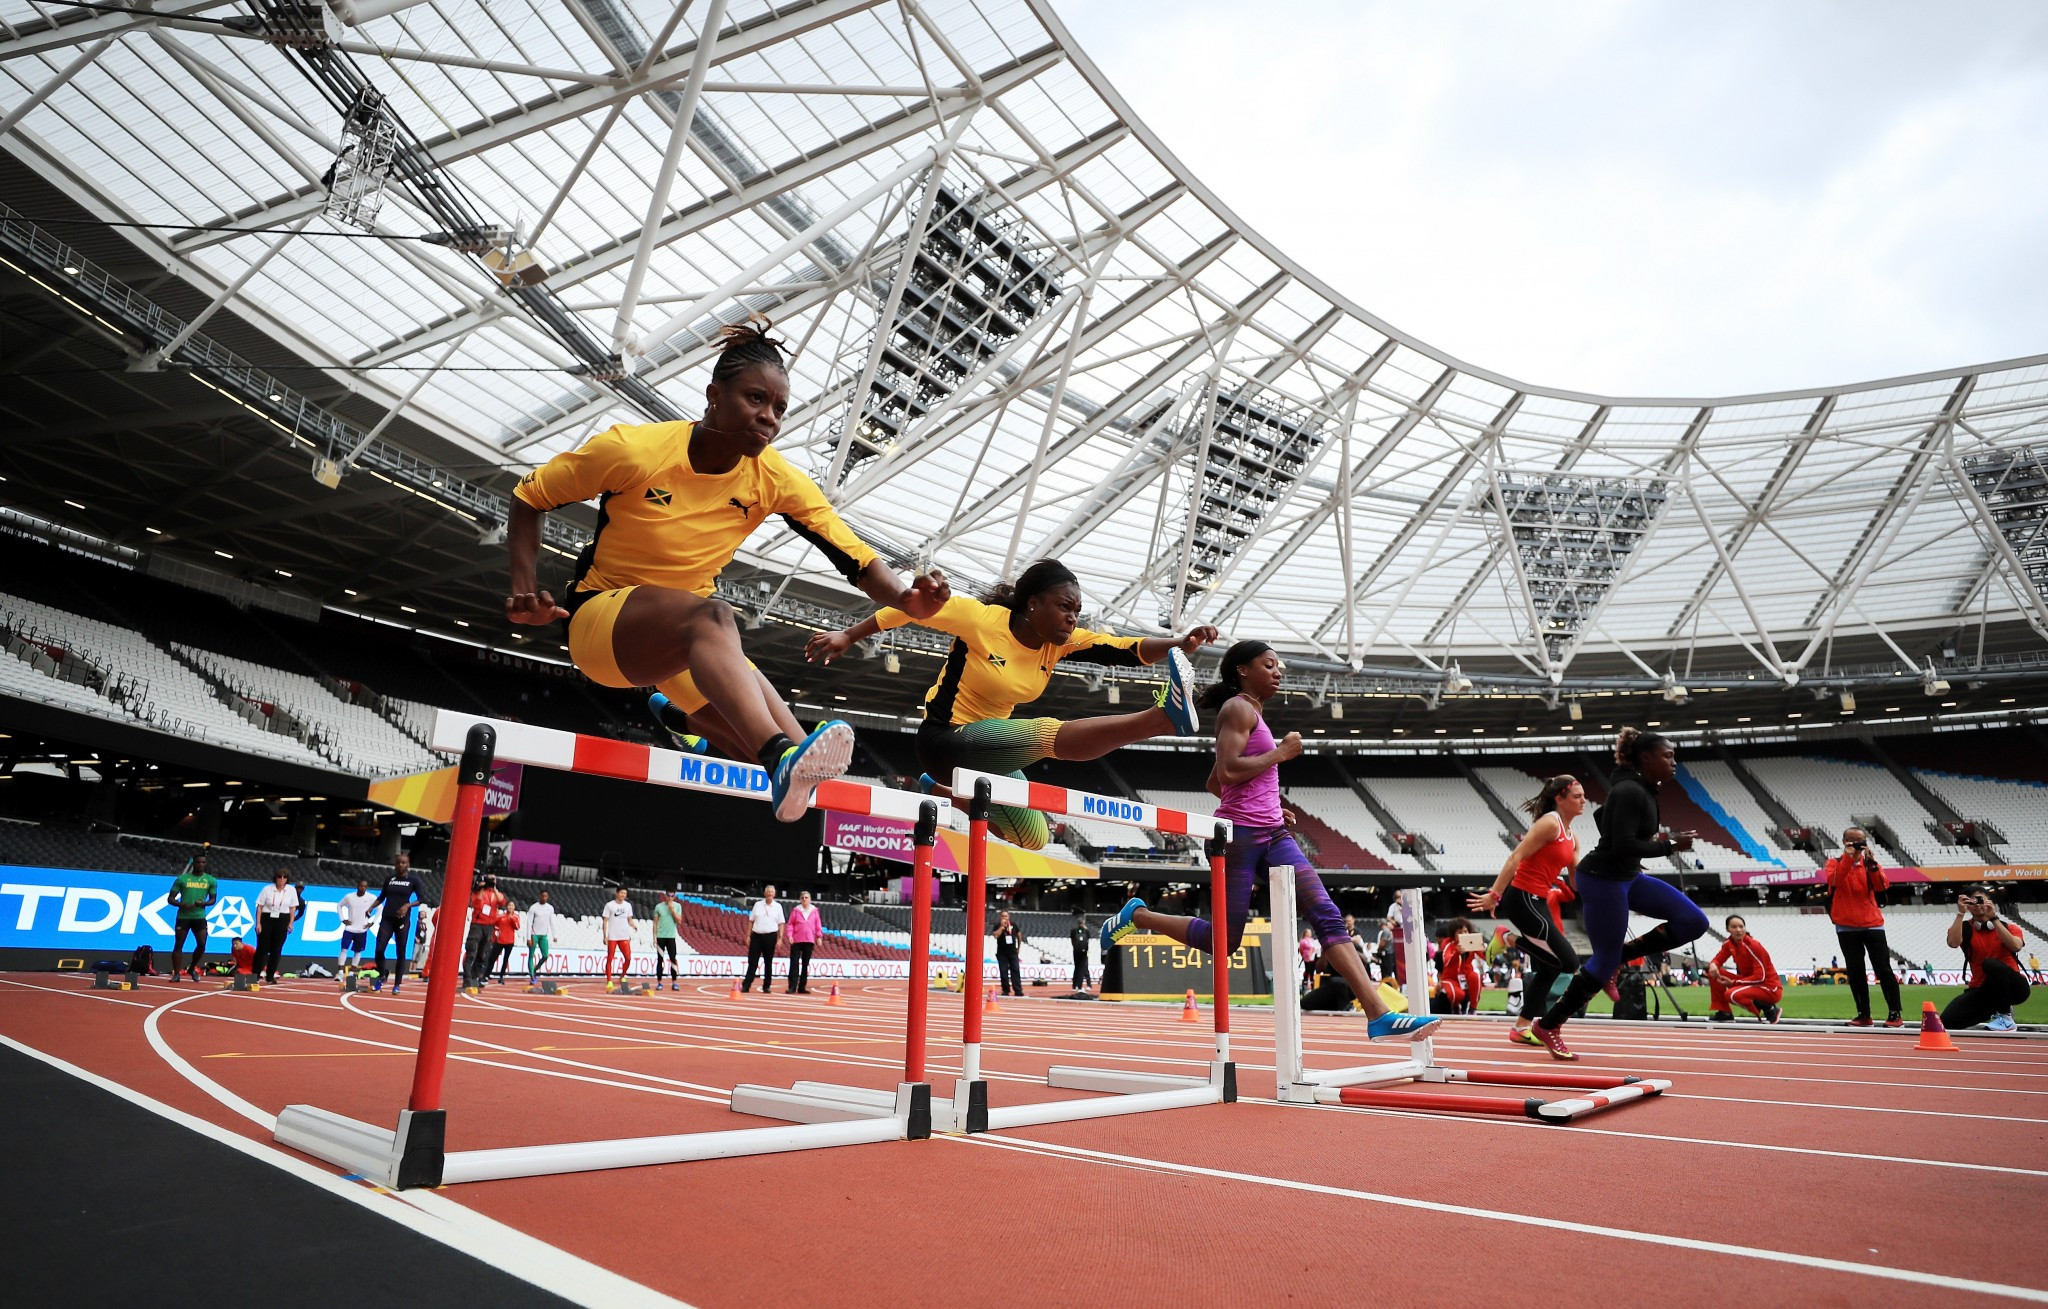 Athletes continued with their final preparations on the track ©Getty Images